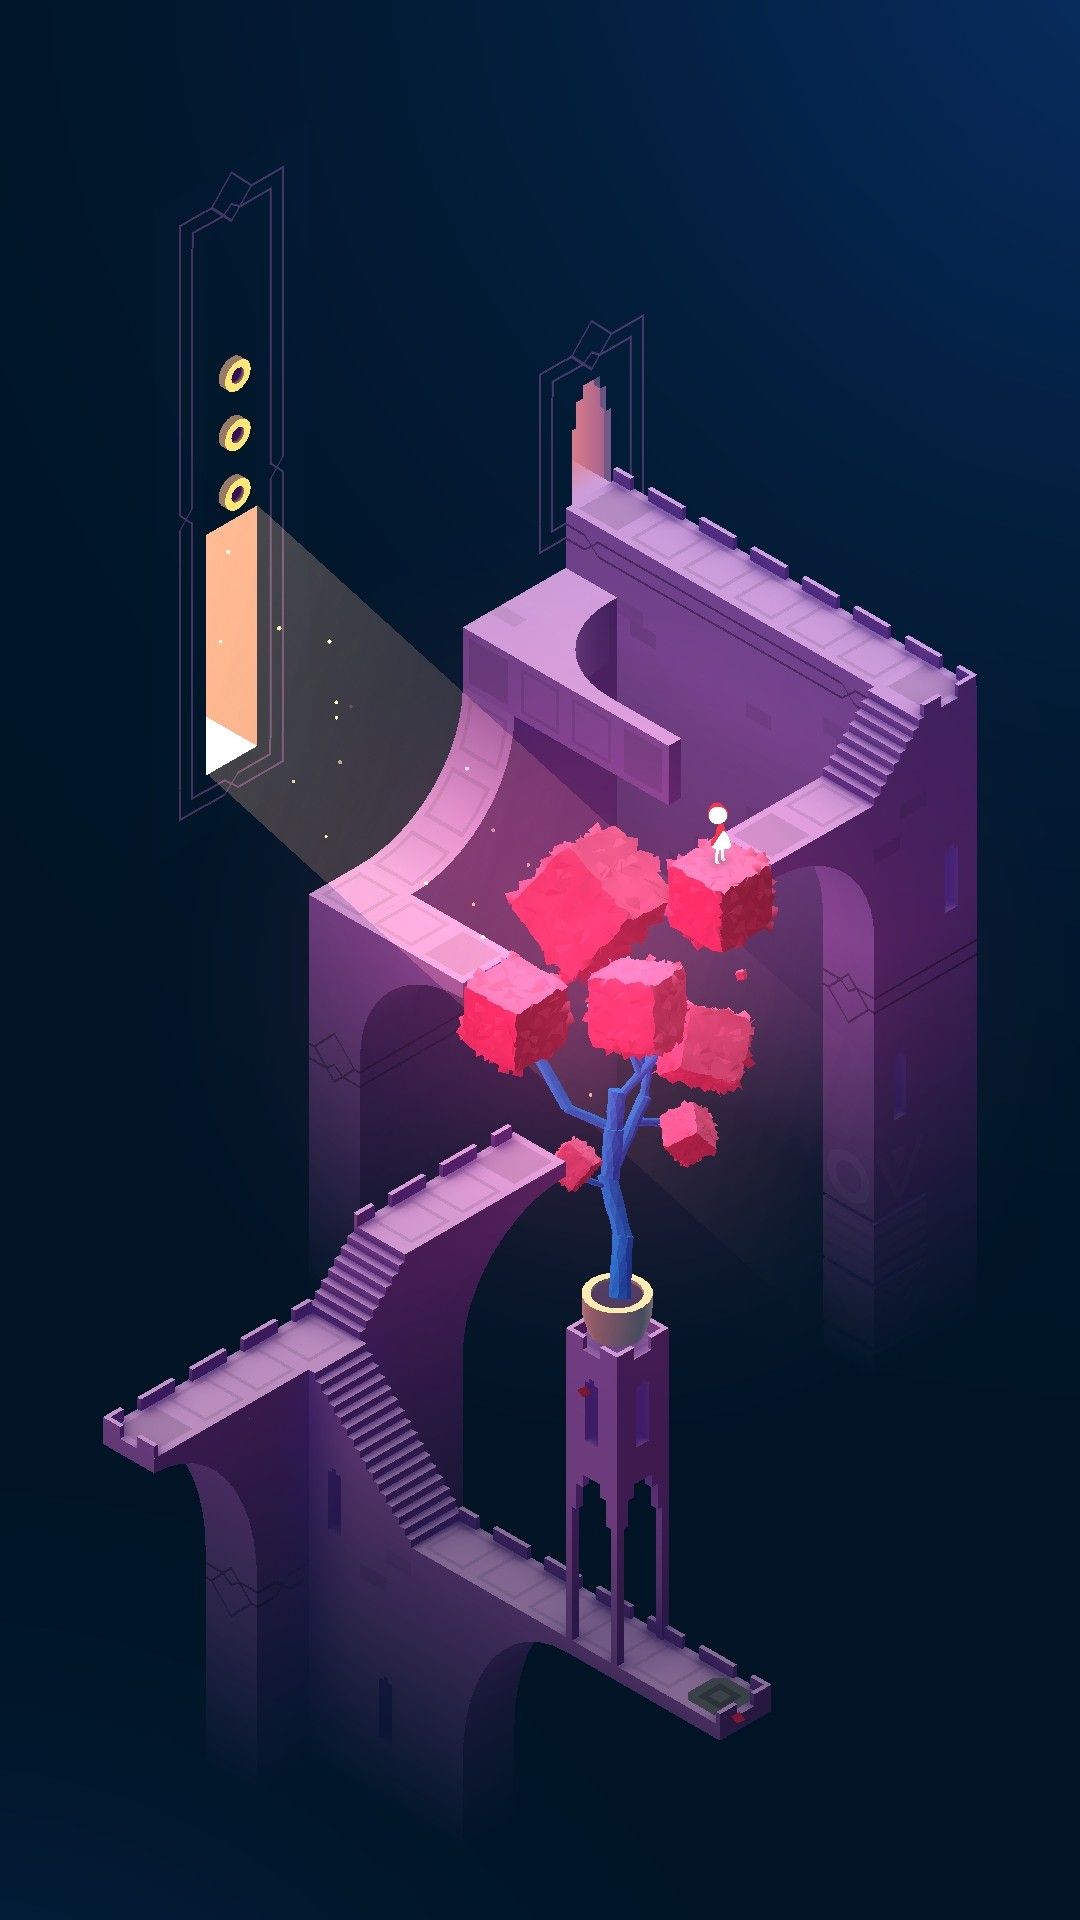 Monument Valley 2 Wallpaper. Monument valley game, Valley game, Monument valley 2